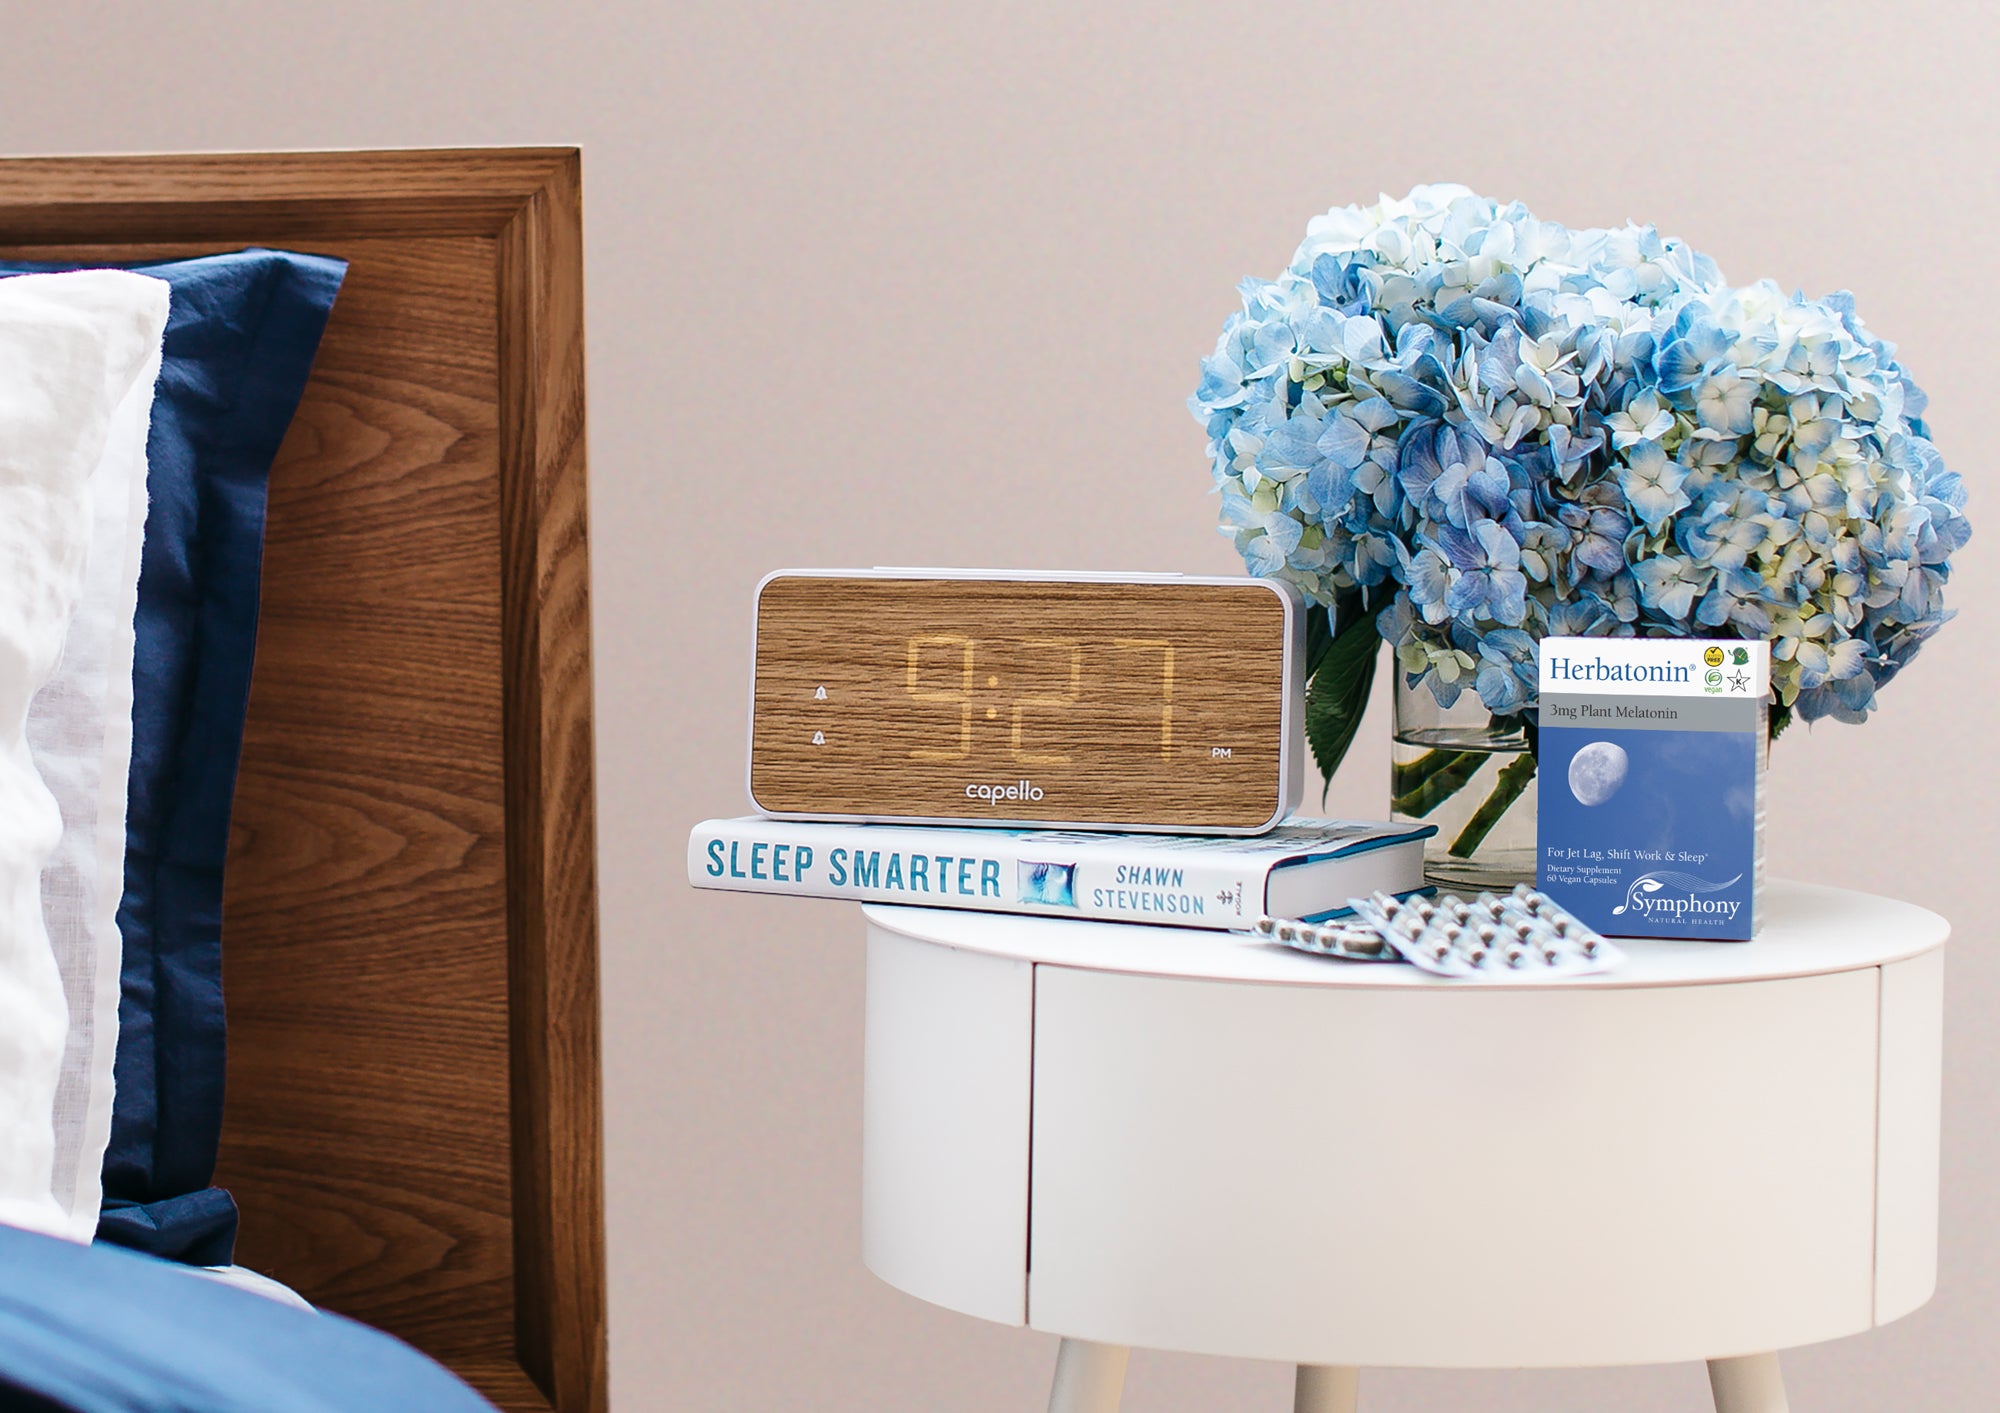 White and Blue bedding with and brown wooden headboard next to white round table with Herbatonin blue box and two blister packs, alarm clock with 9;27 PM digital display on Sleep Smarter by Shawn Stevenson book, blue hydrangea flowers in clear vase filled with water